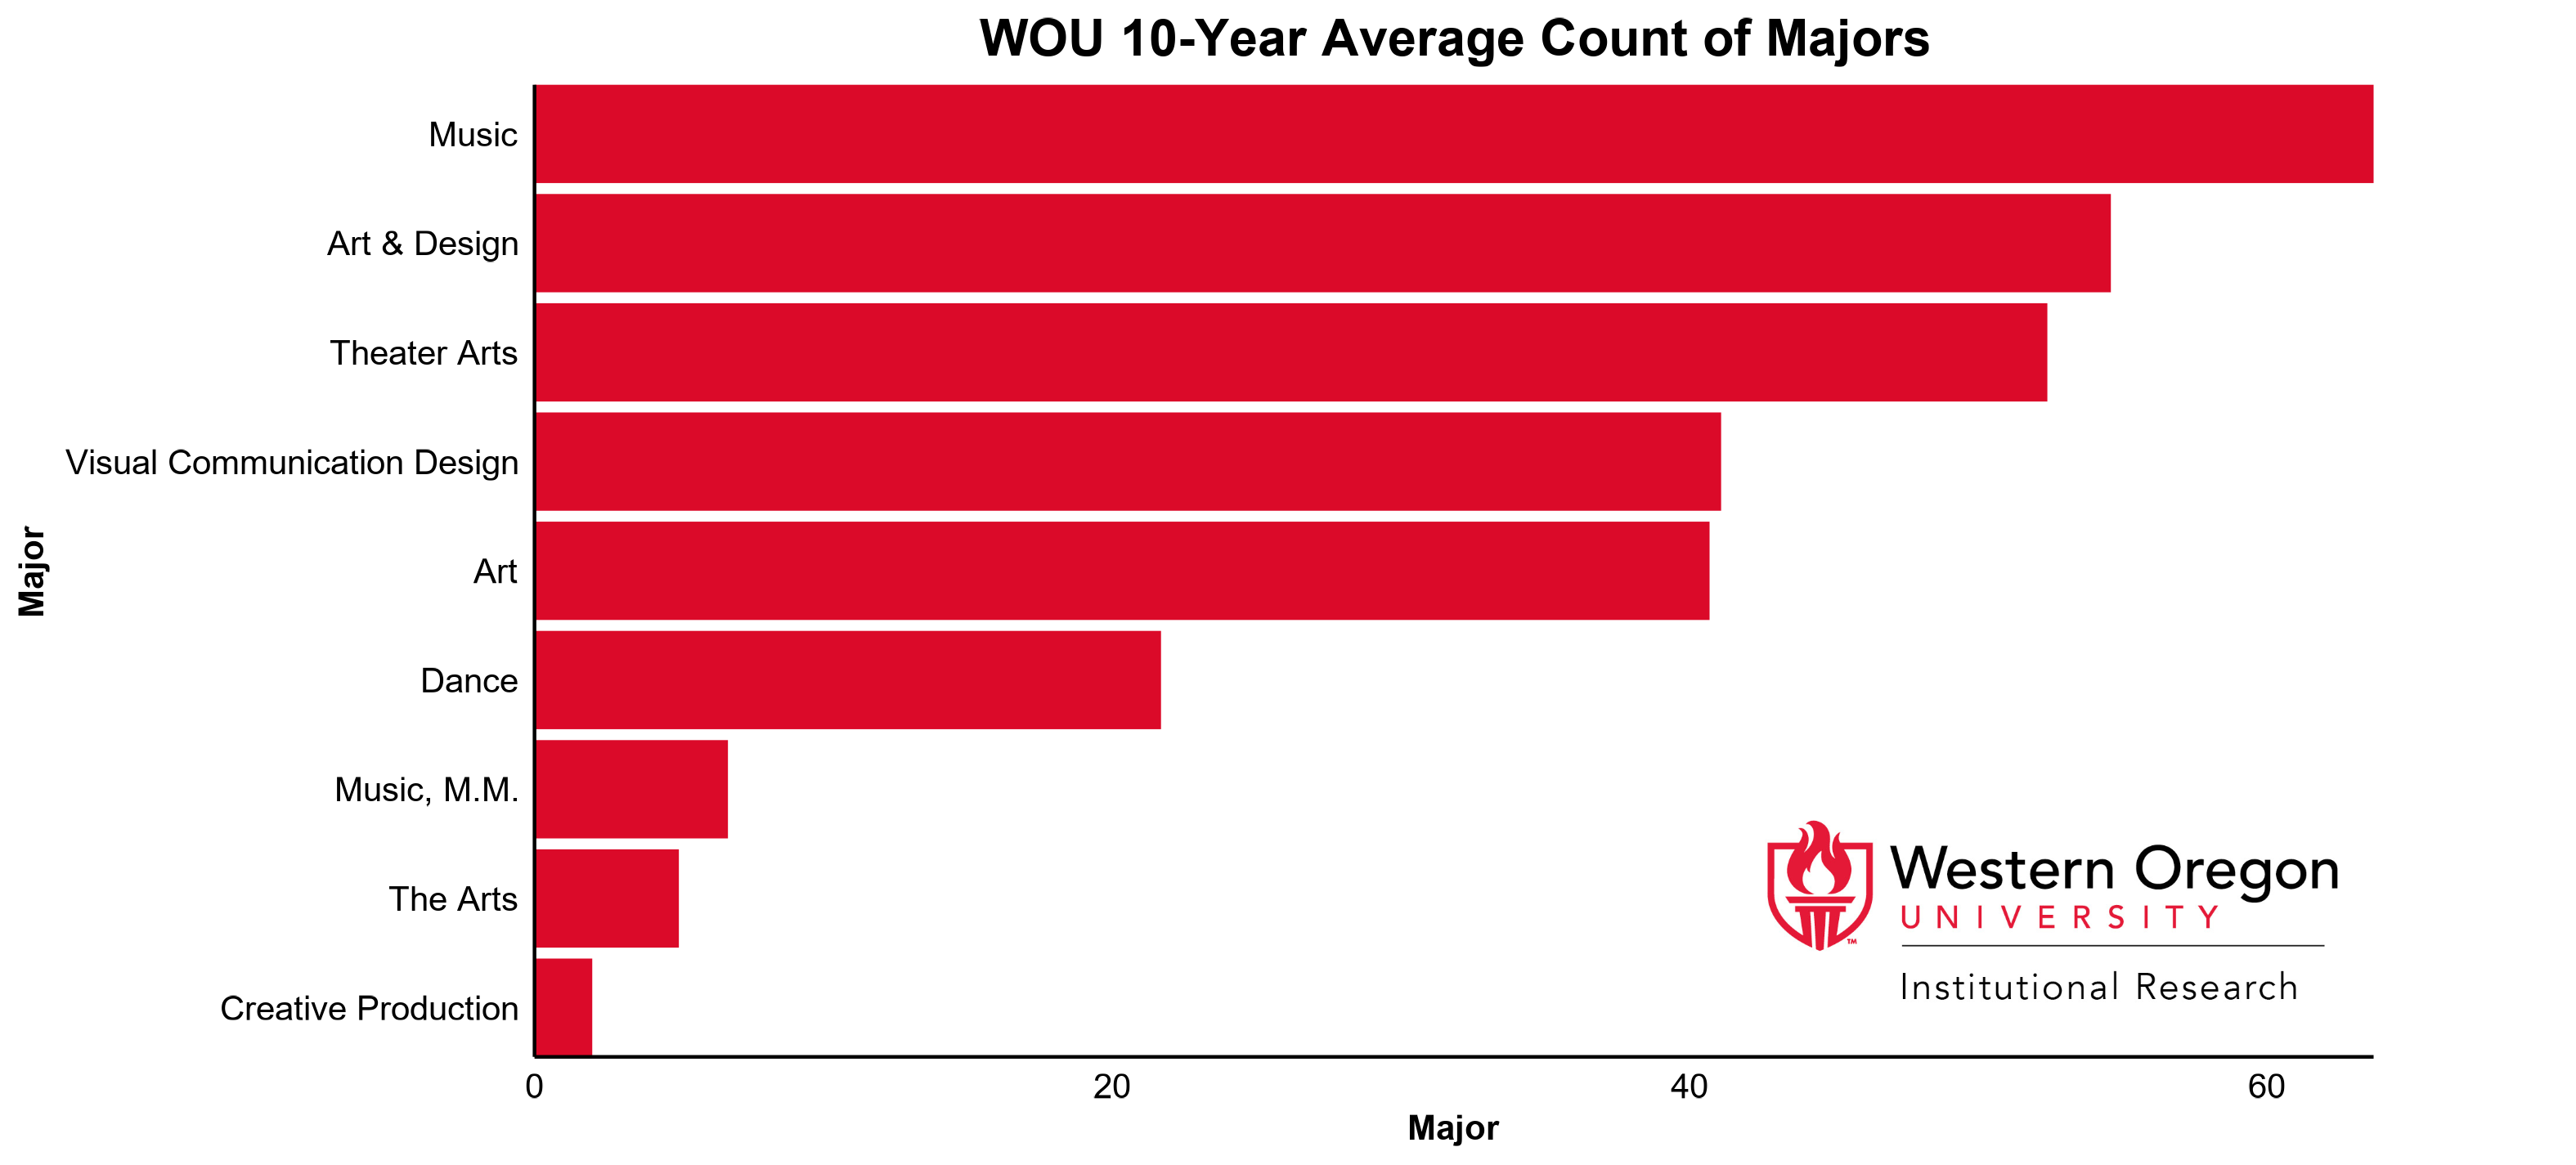 Bar graph of the 10-year average count of majors at WOU for the Creative Arts division